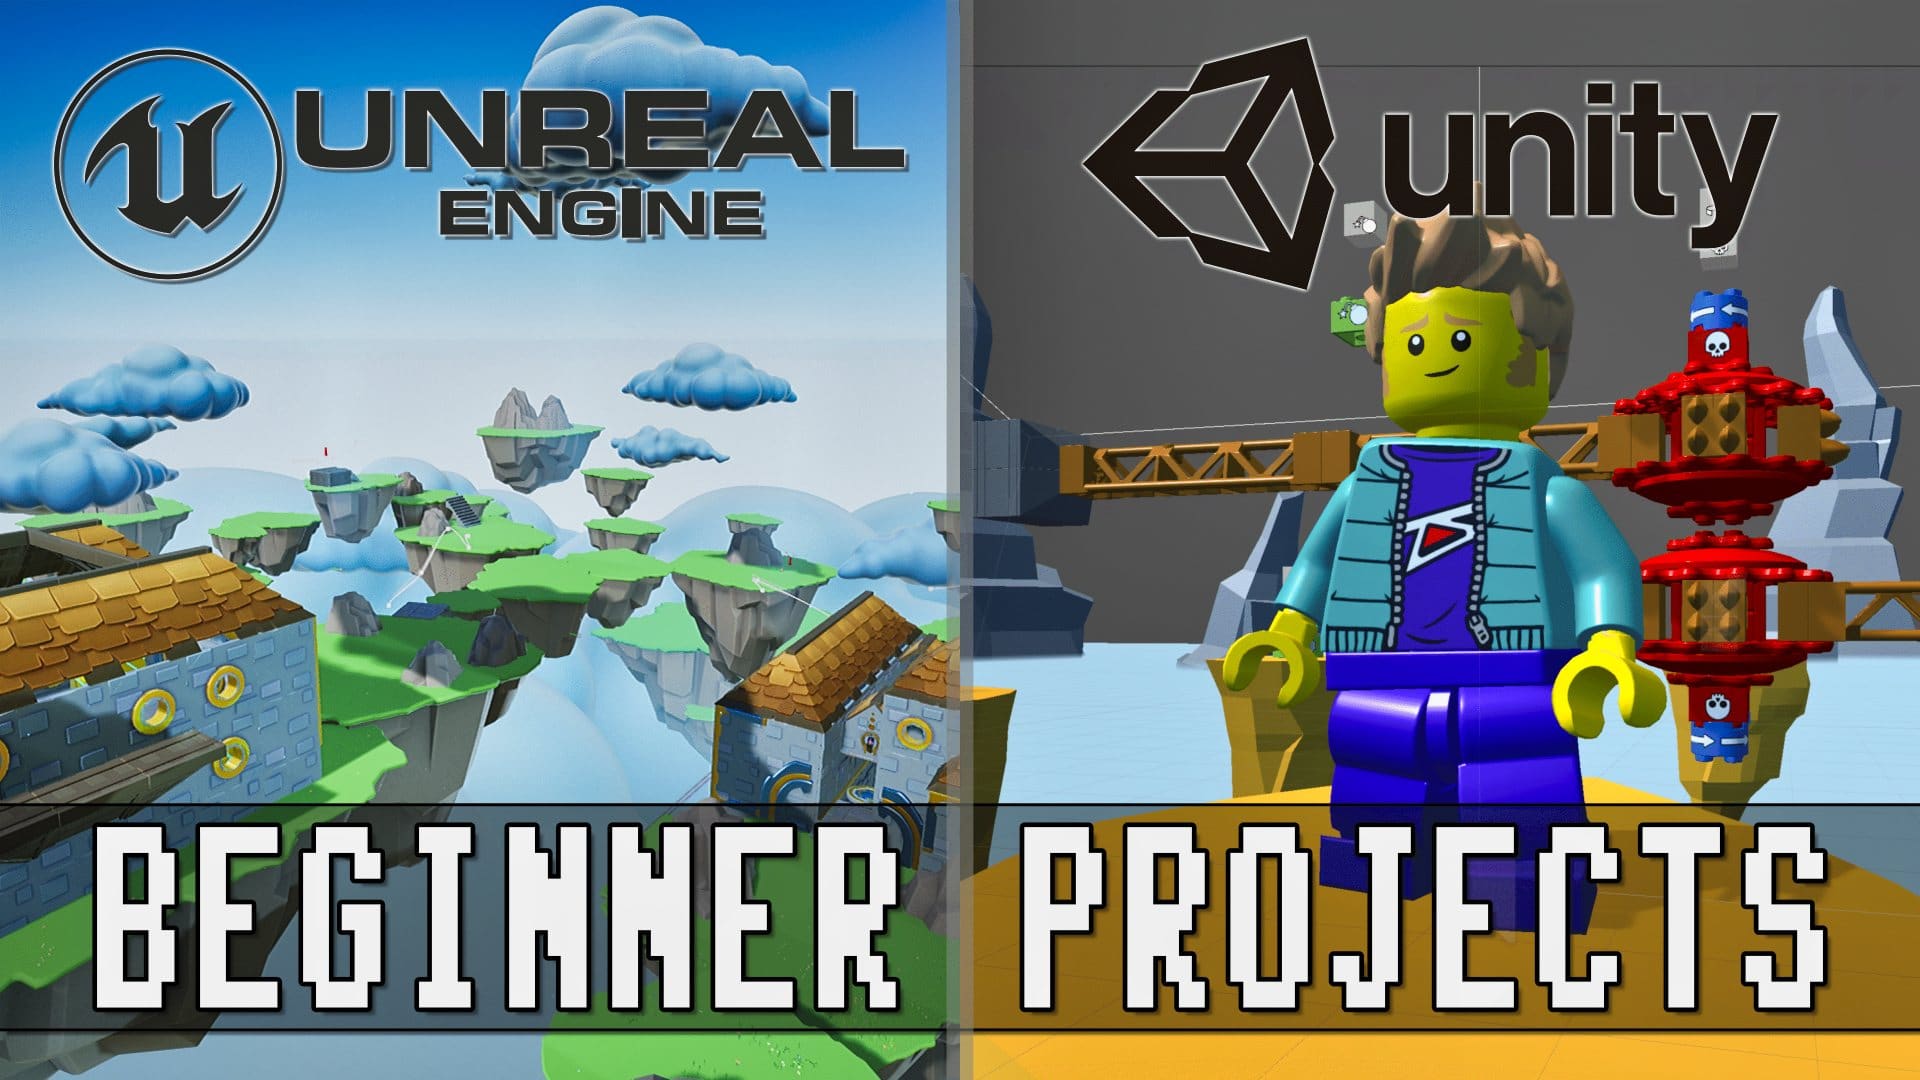 is making a game harder in unreal engine or unity